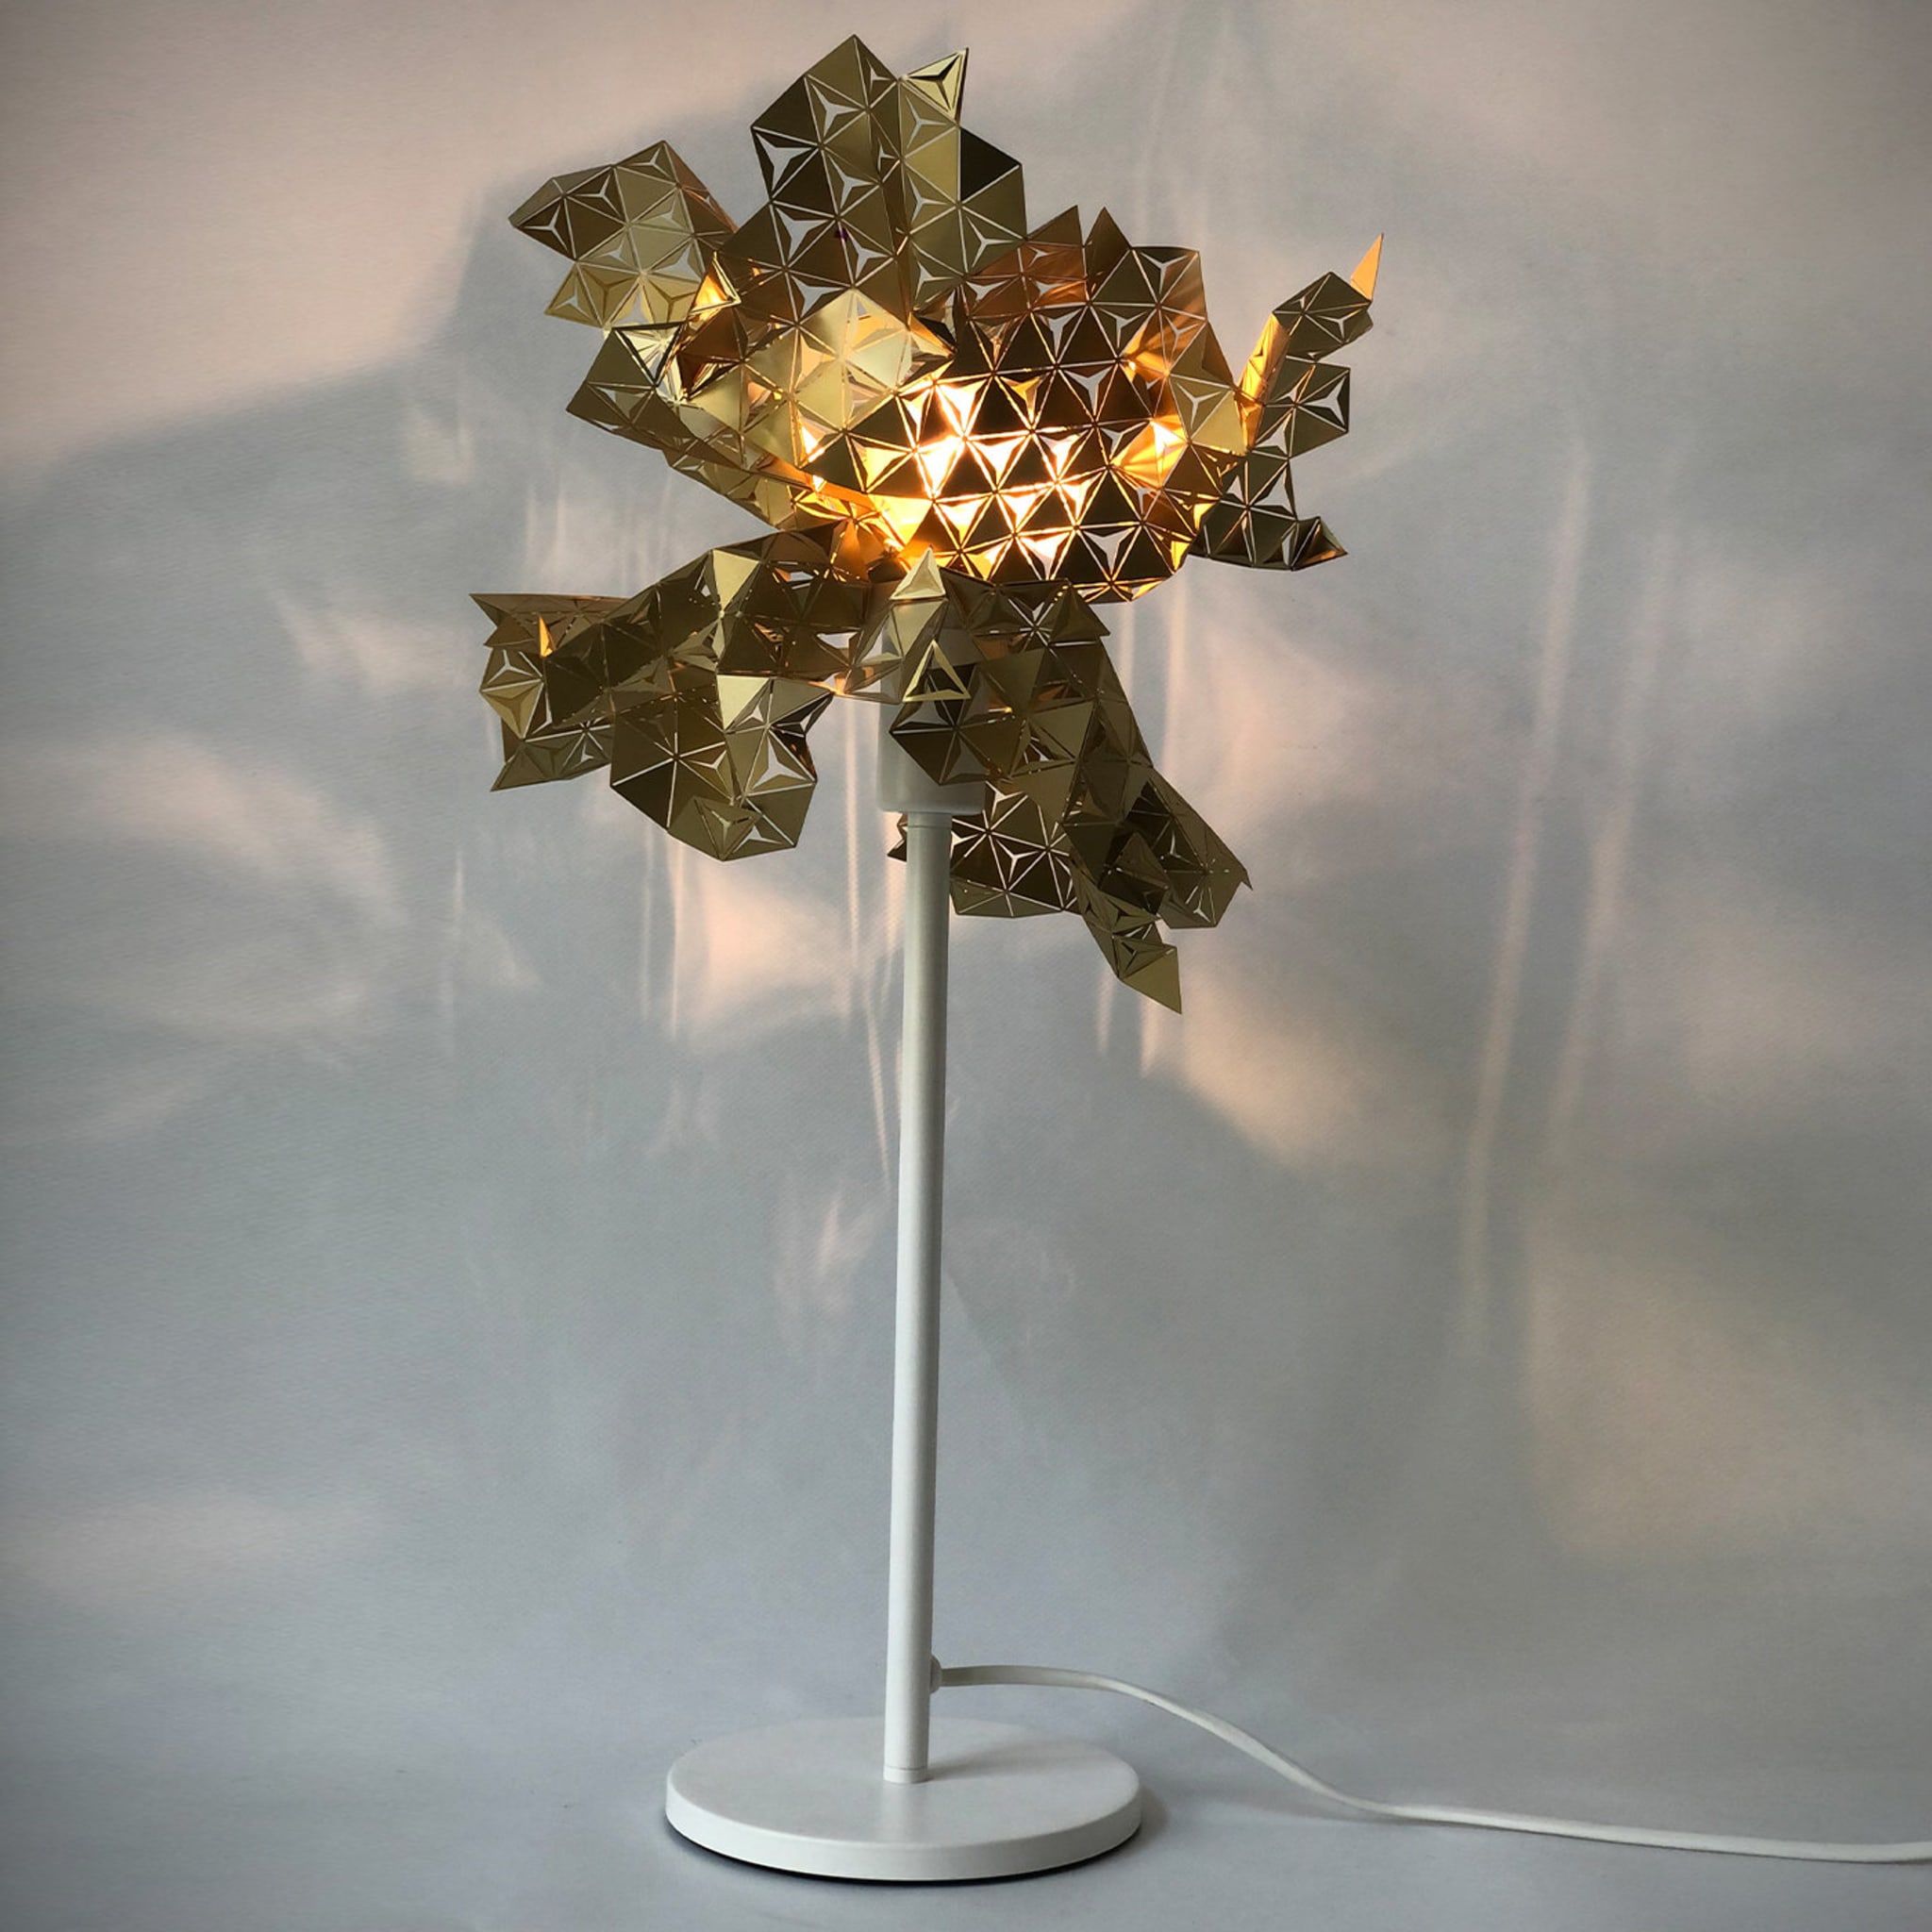 Scales S2 Brass Table Lamp  - Alternative view 1